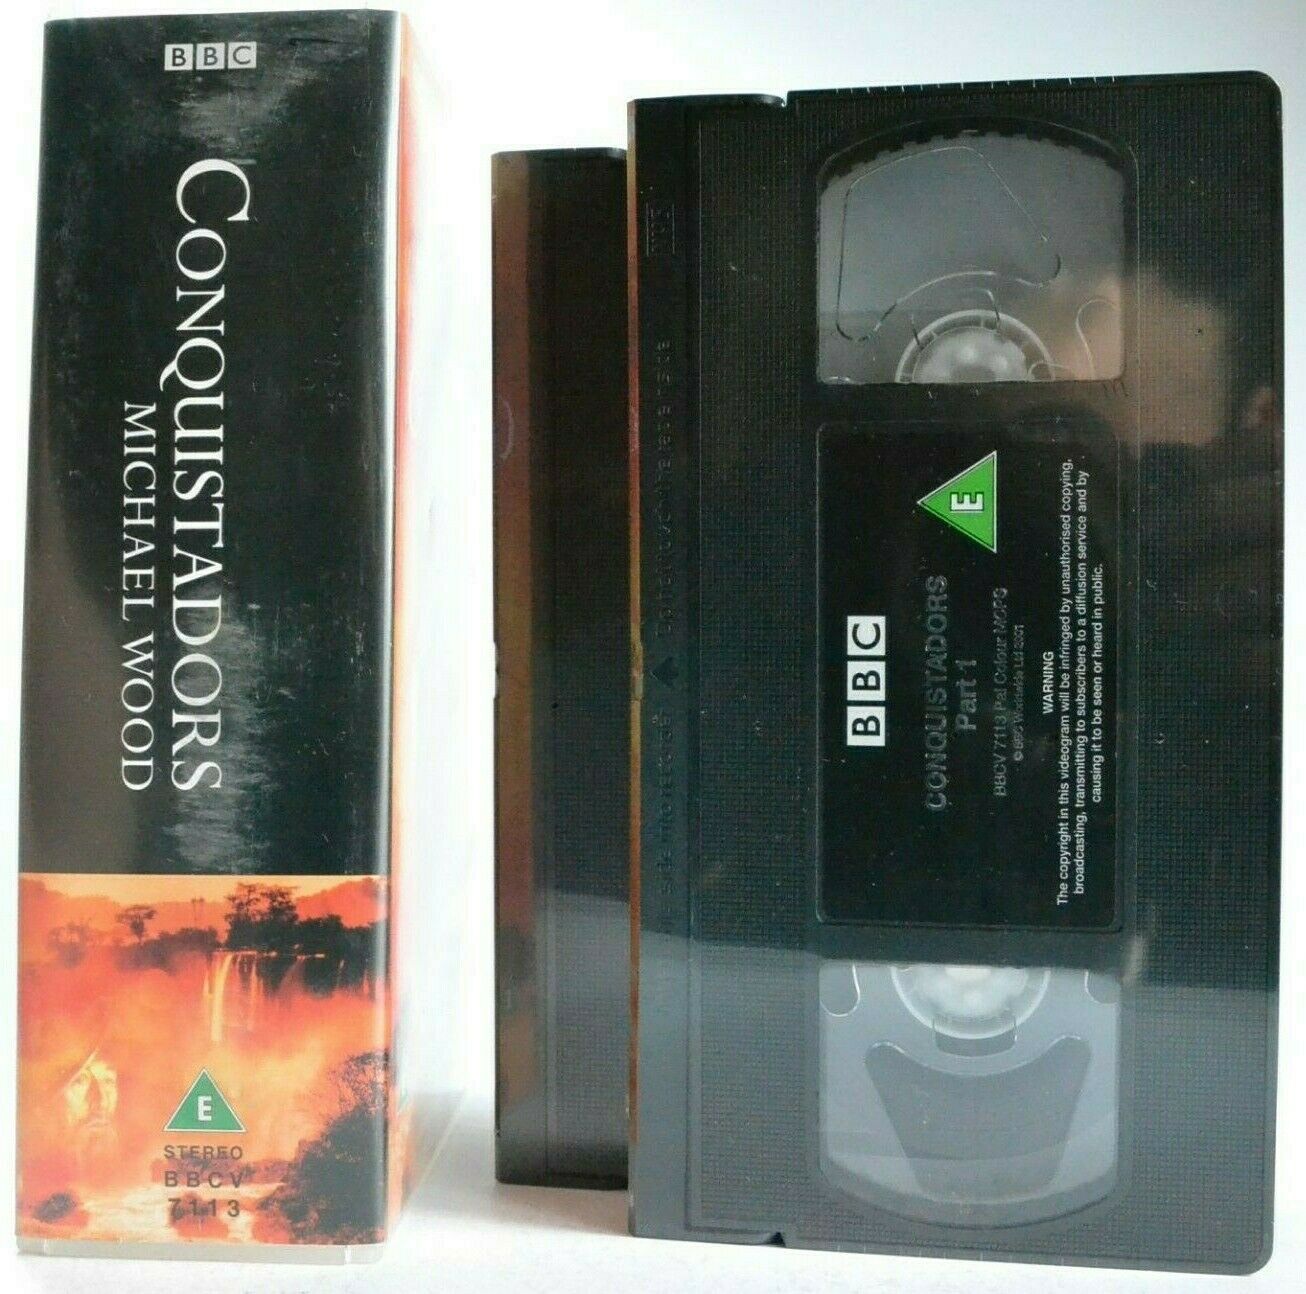 Conquistadors: By Michael Wood - BBC Documentary - Epic Journey - Religion - VHS-